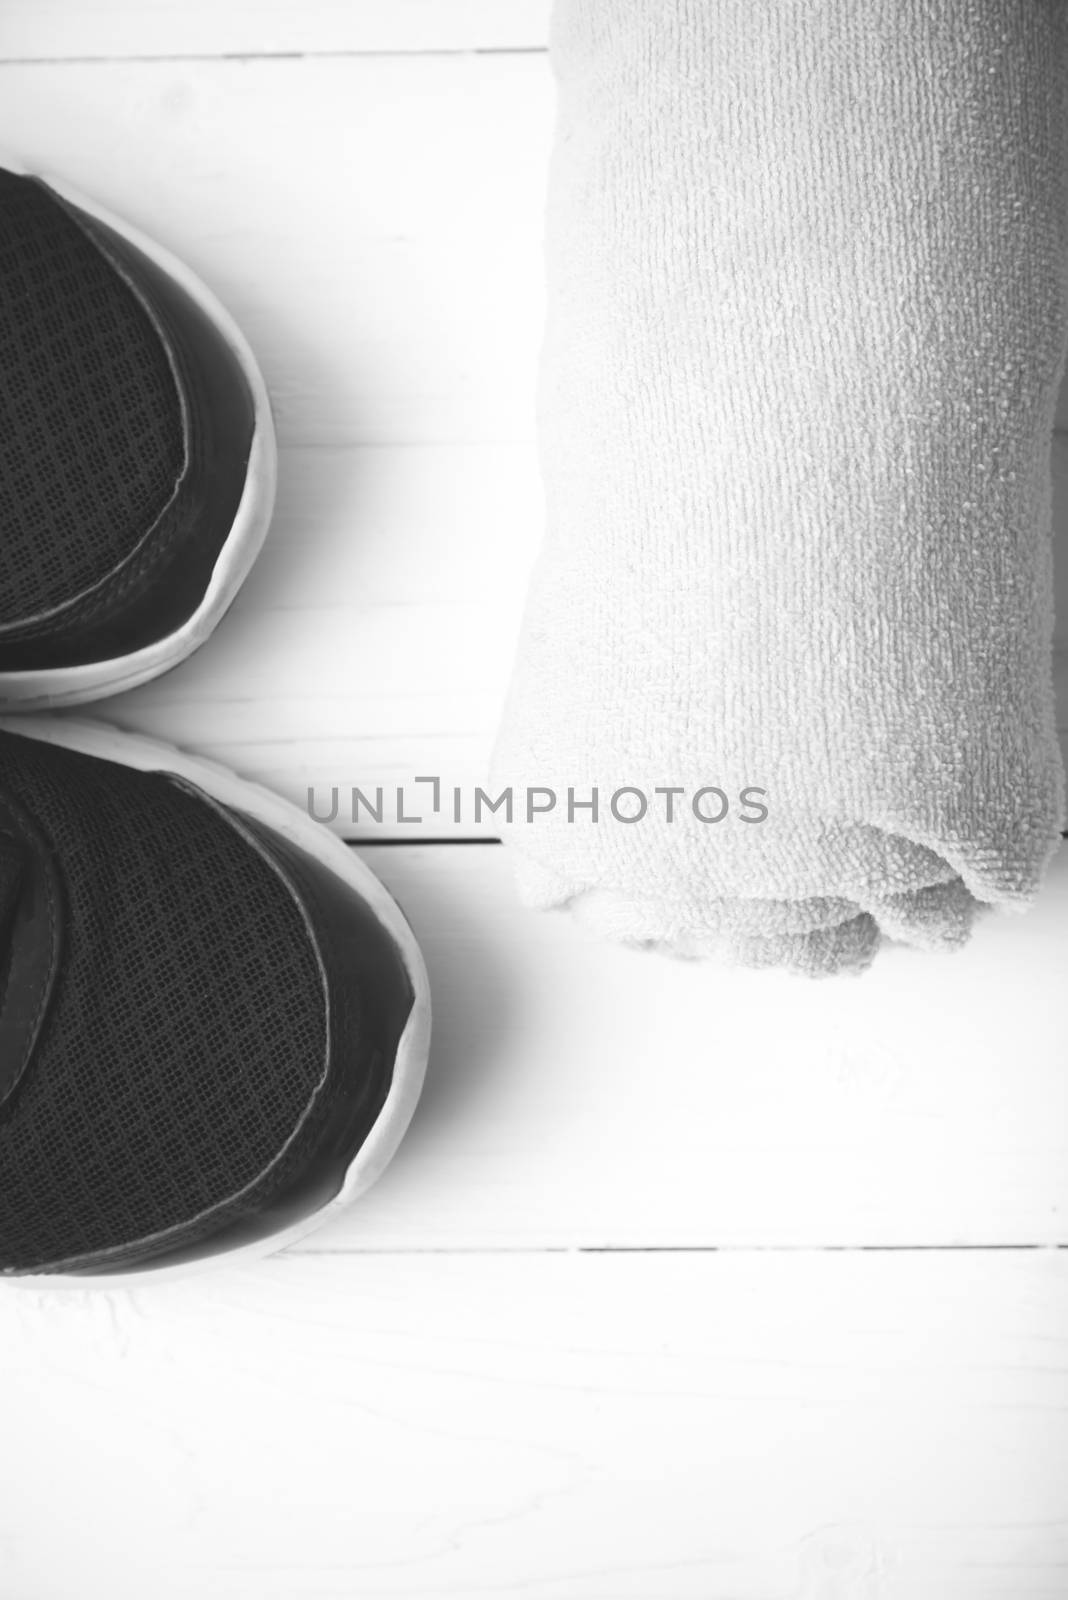 running shoes and towel on white wood table black and white tone color style